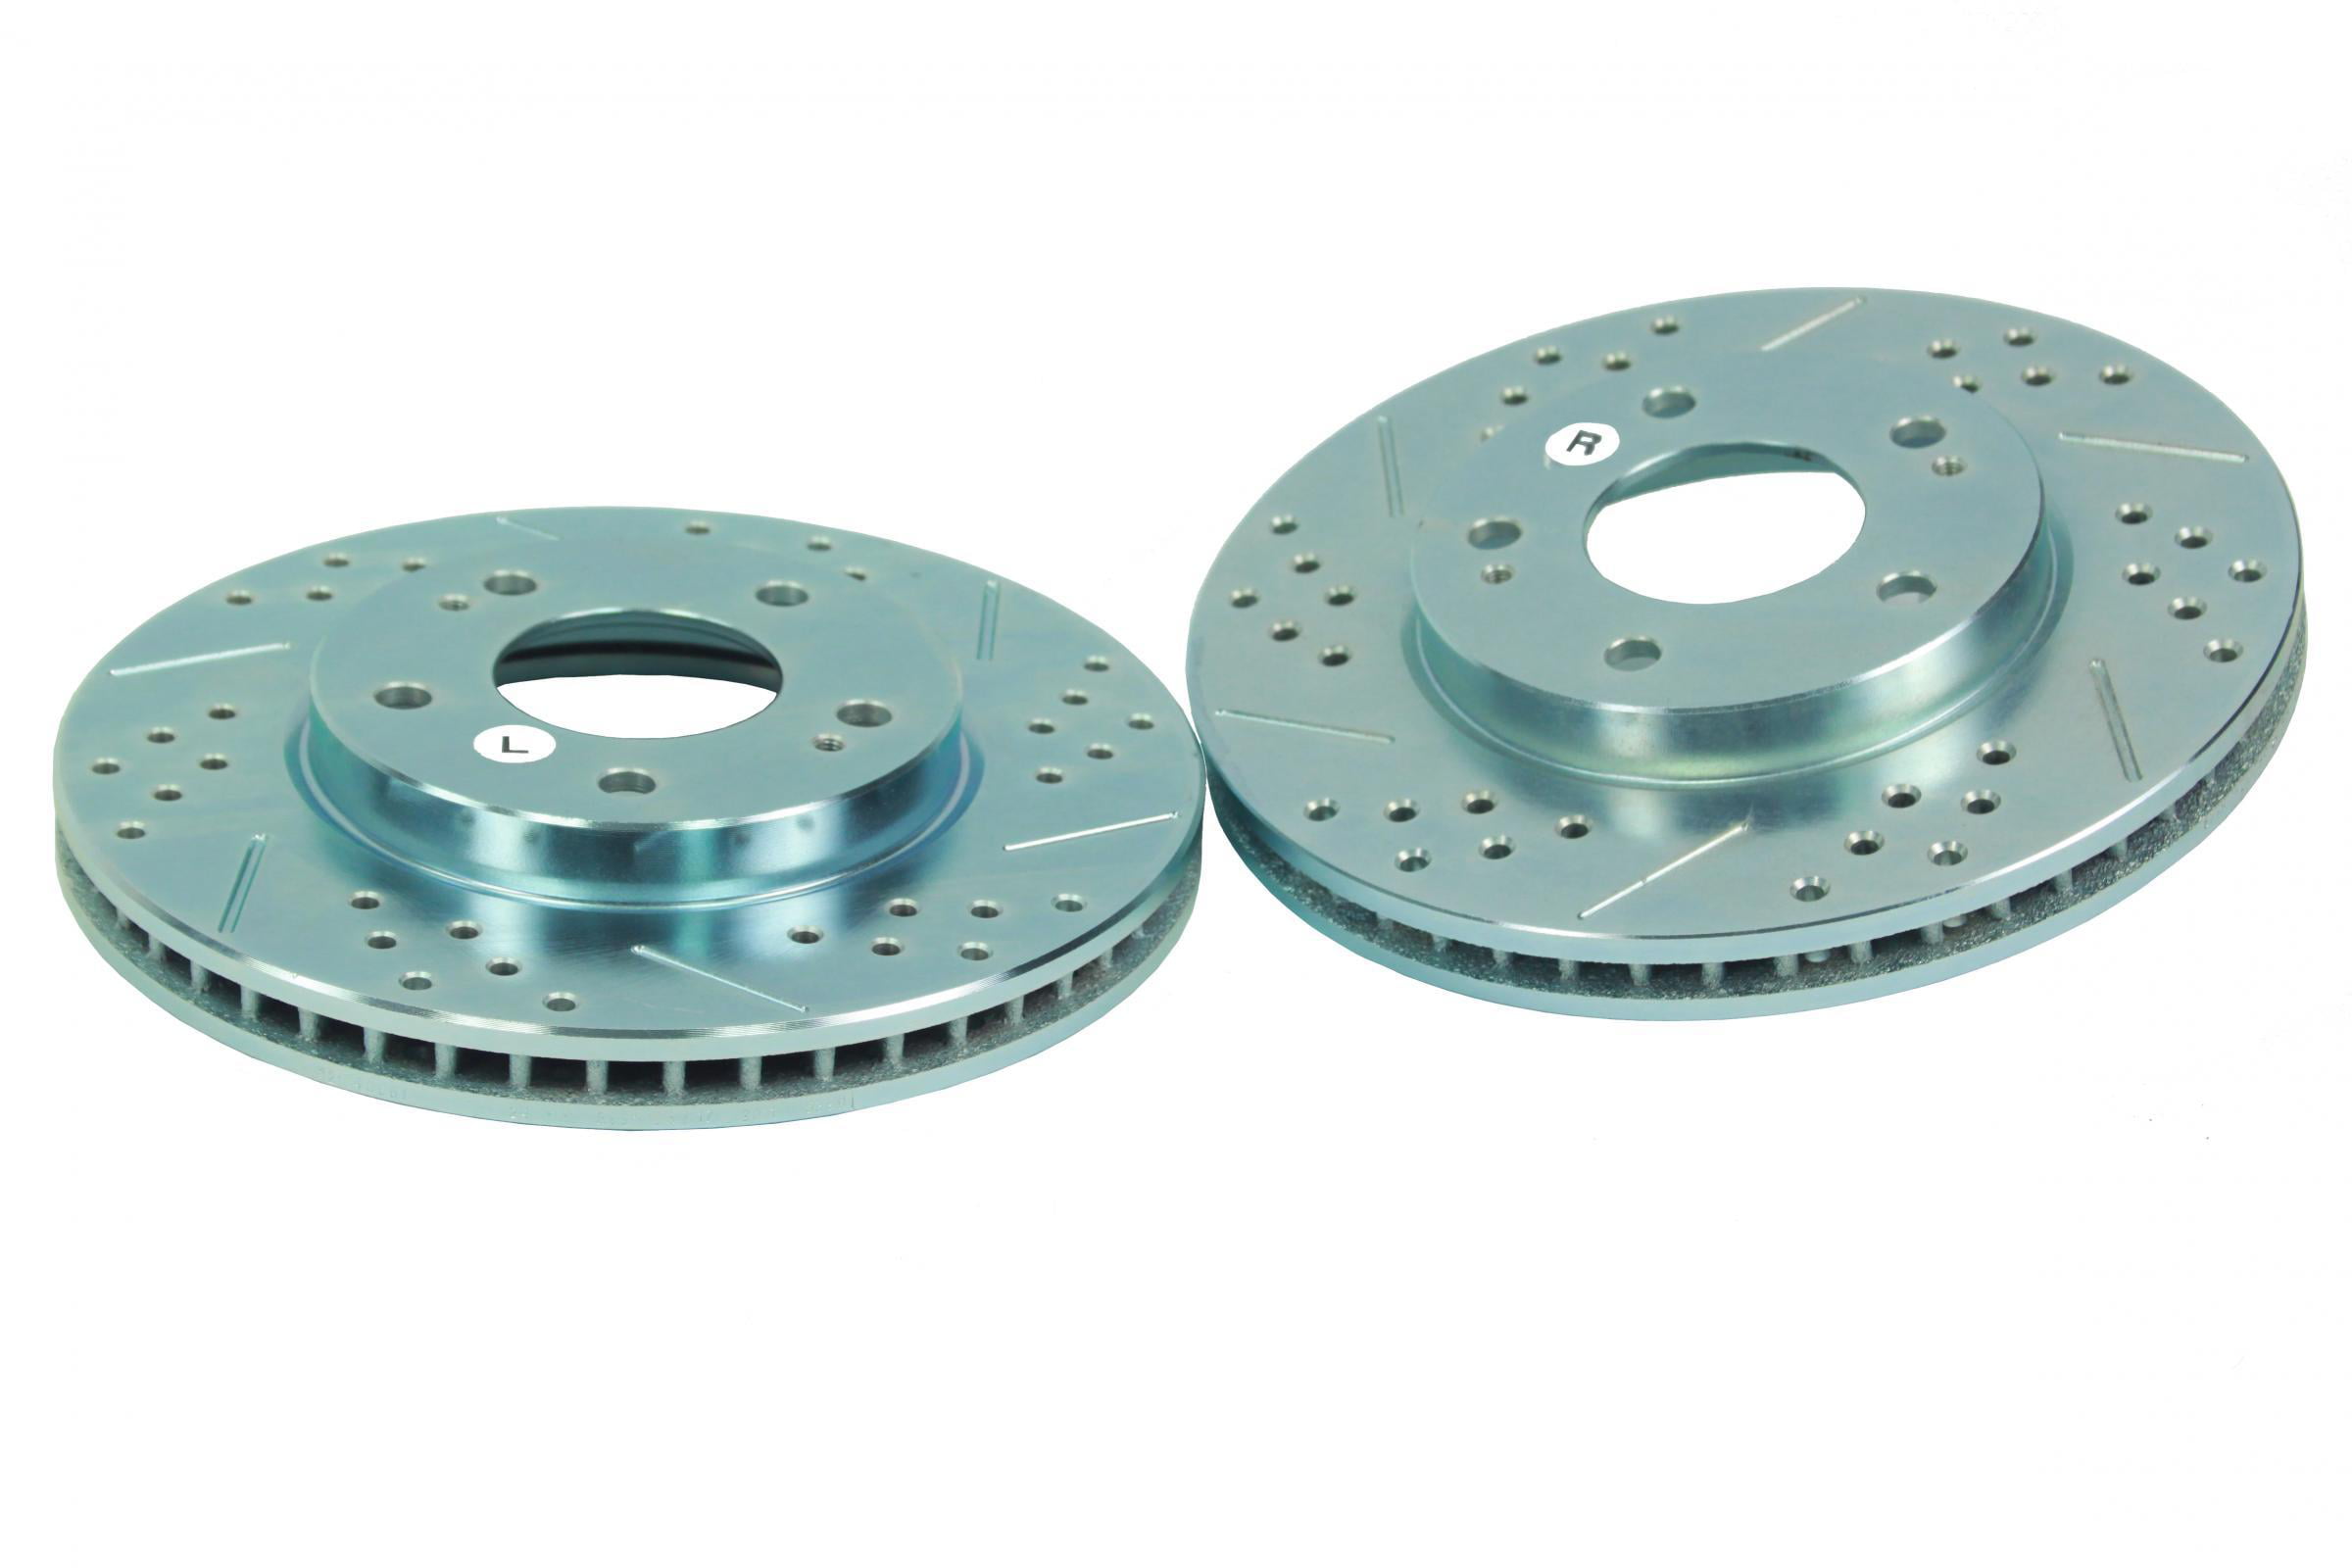 BAER 05440-020 Sport Rotors Slotted Drilled Zinc Plated Front Brake Rotor Set Pair 